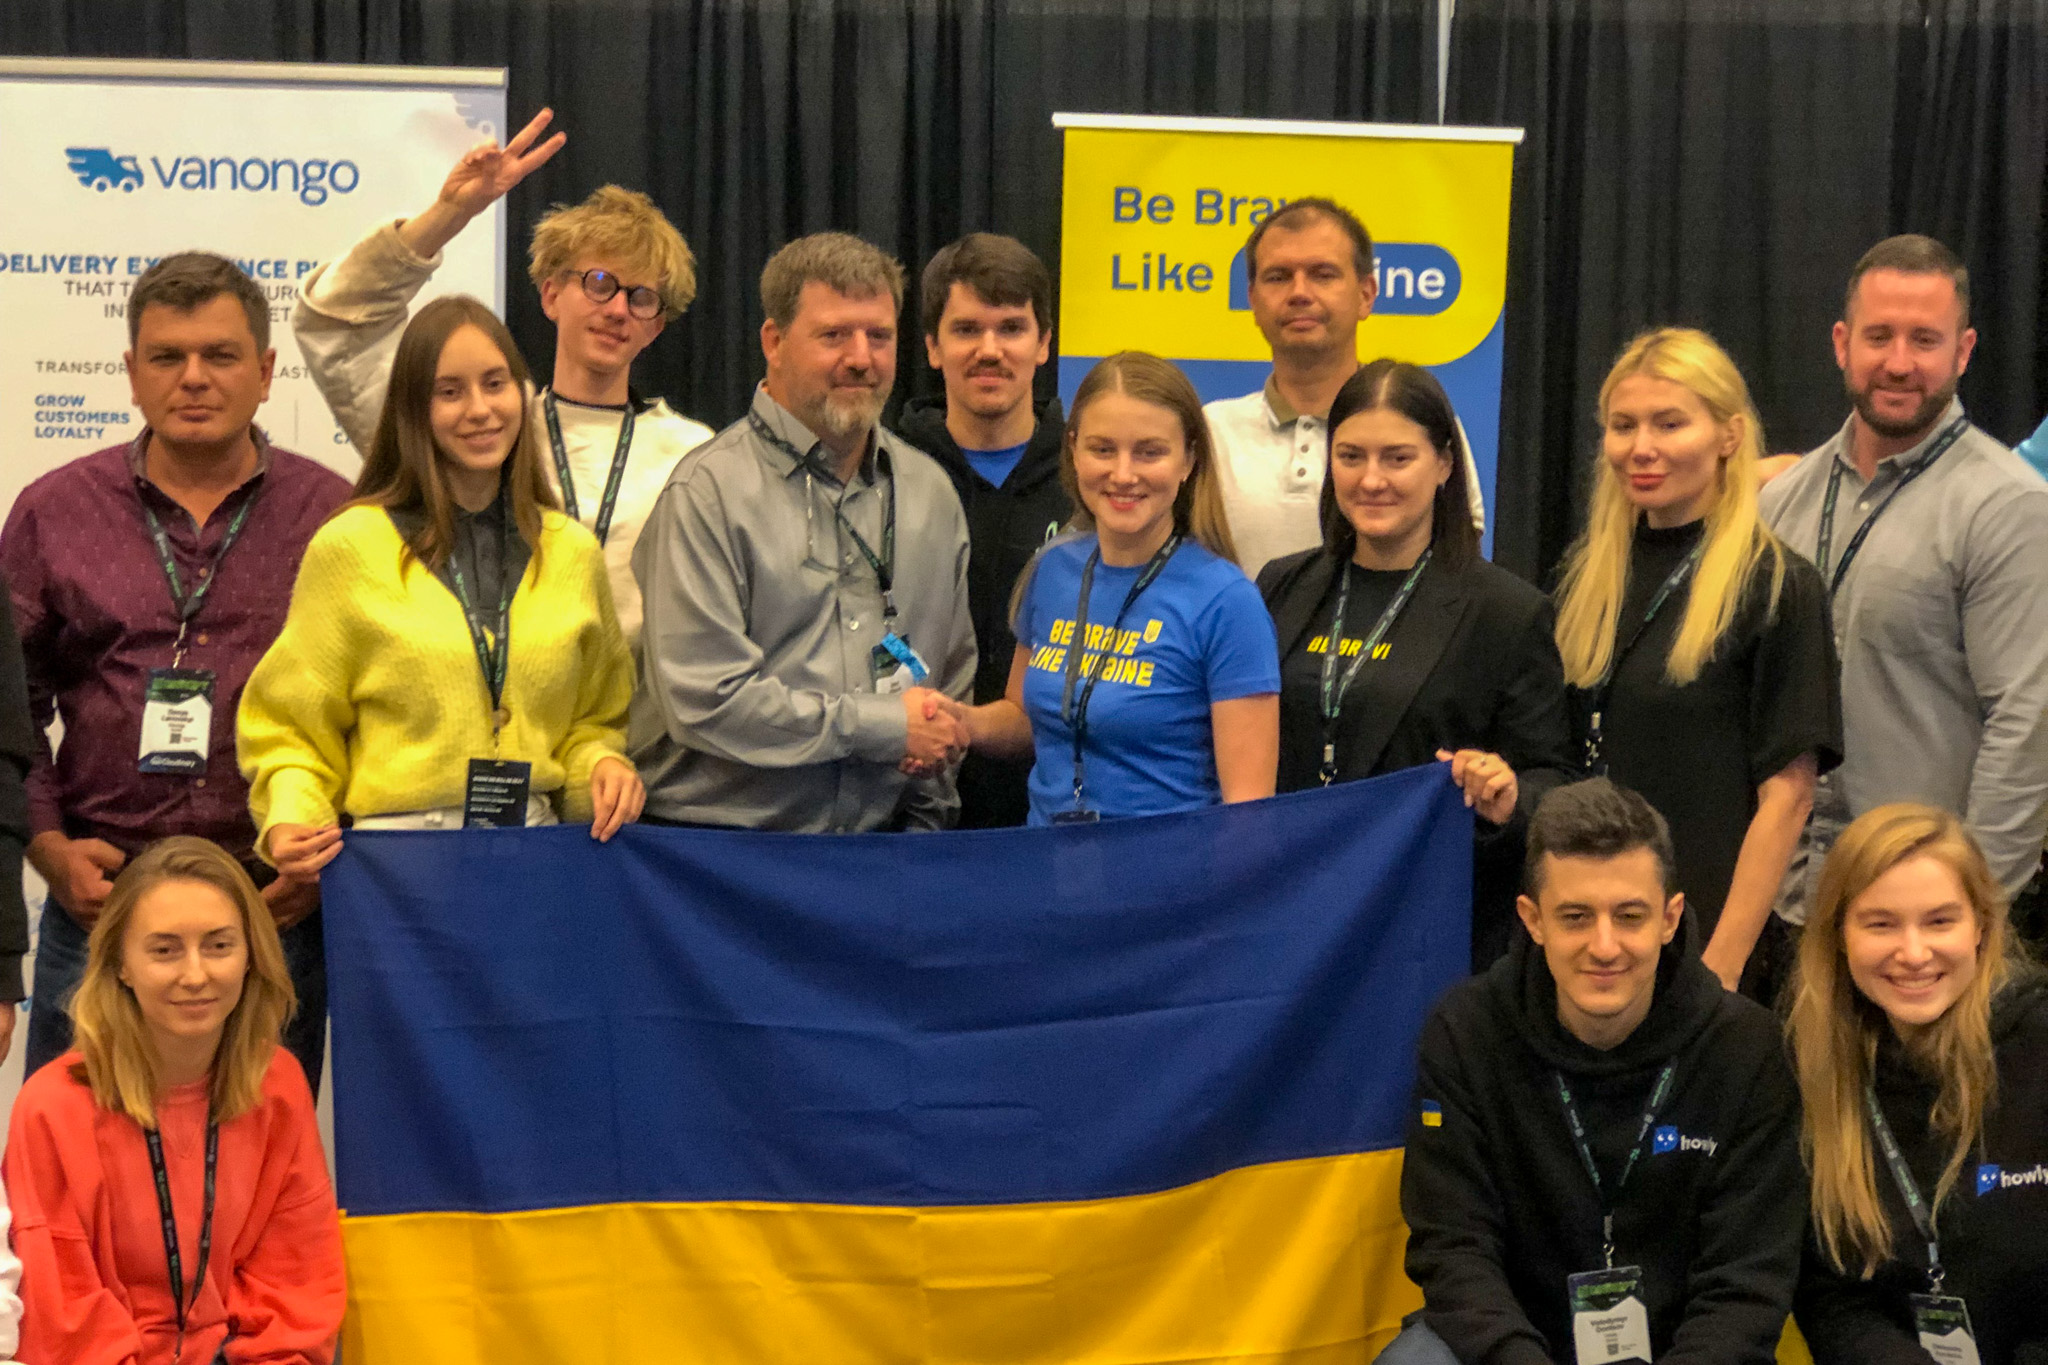 Ukraine tech delegation finds its way to SF during the war